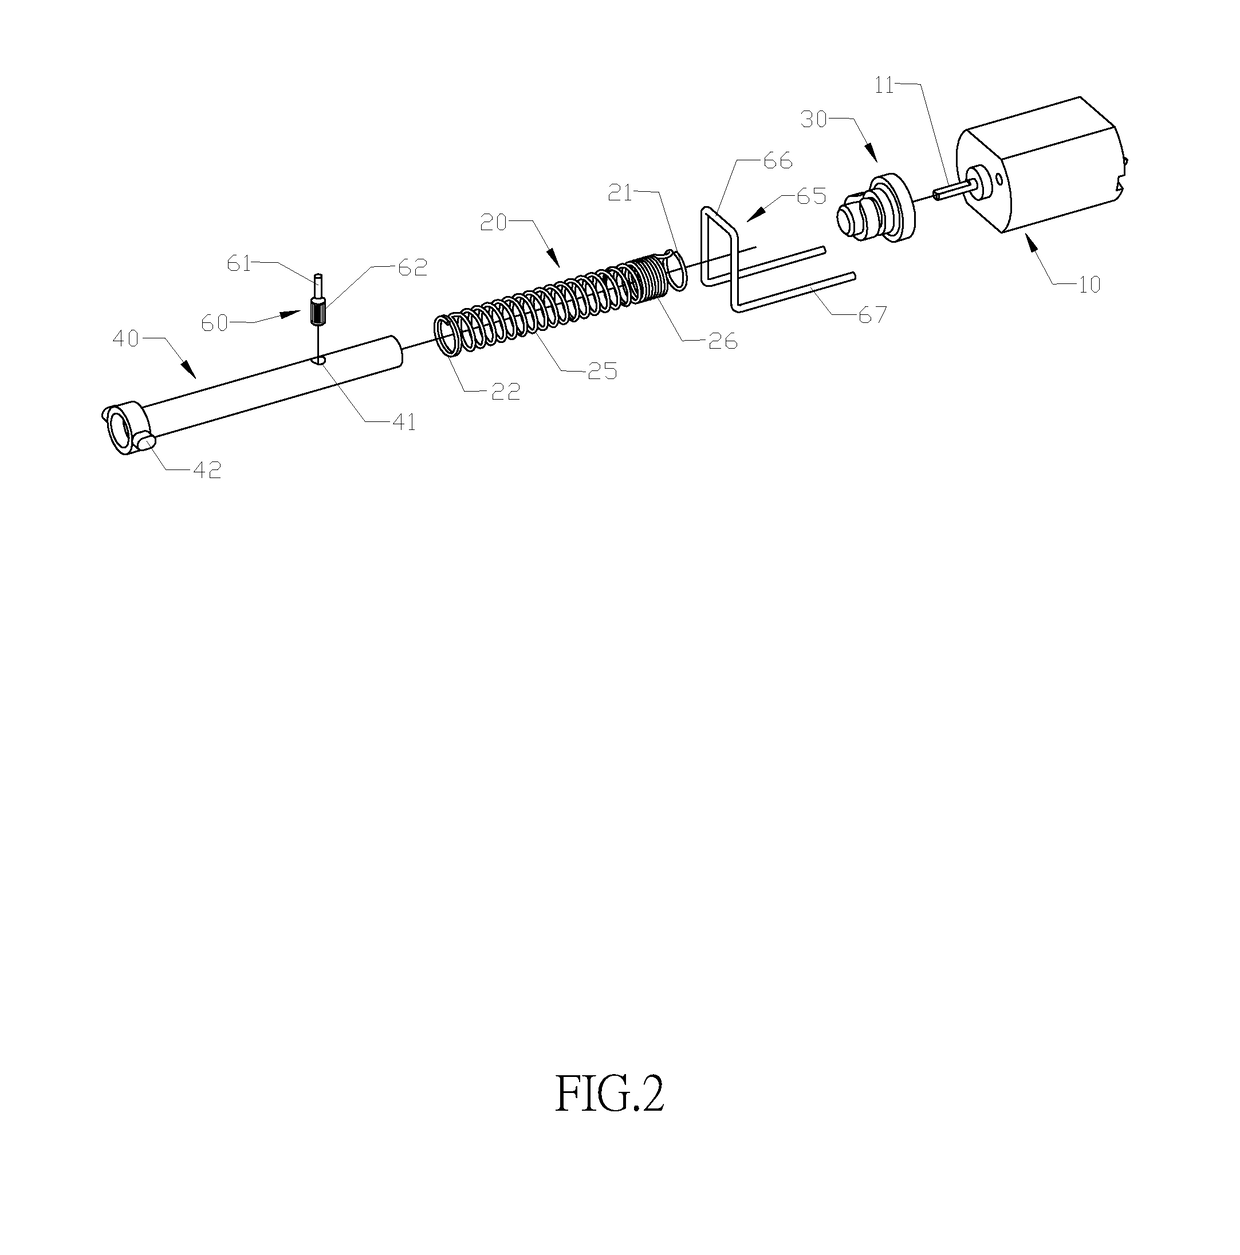 Actuator Assembly for Locking Devices